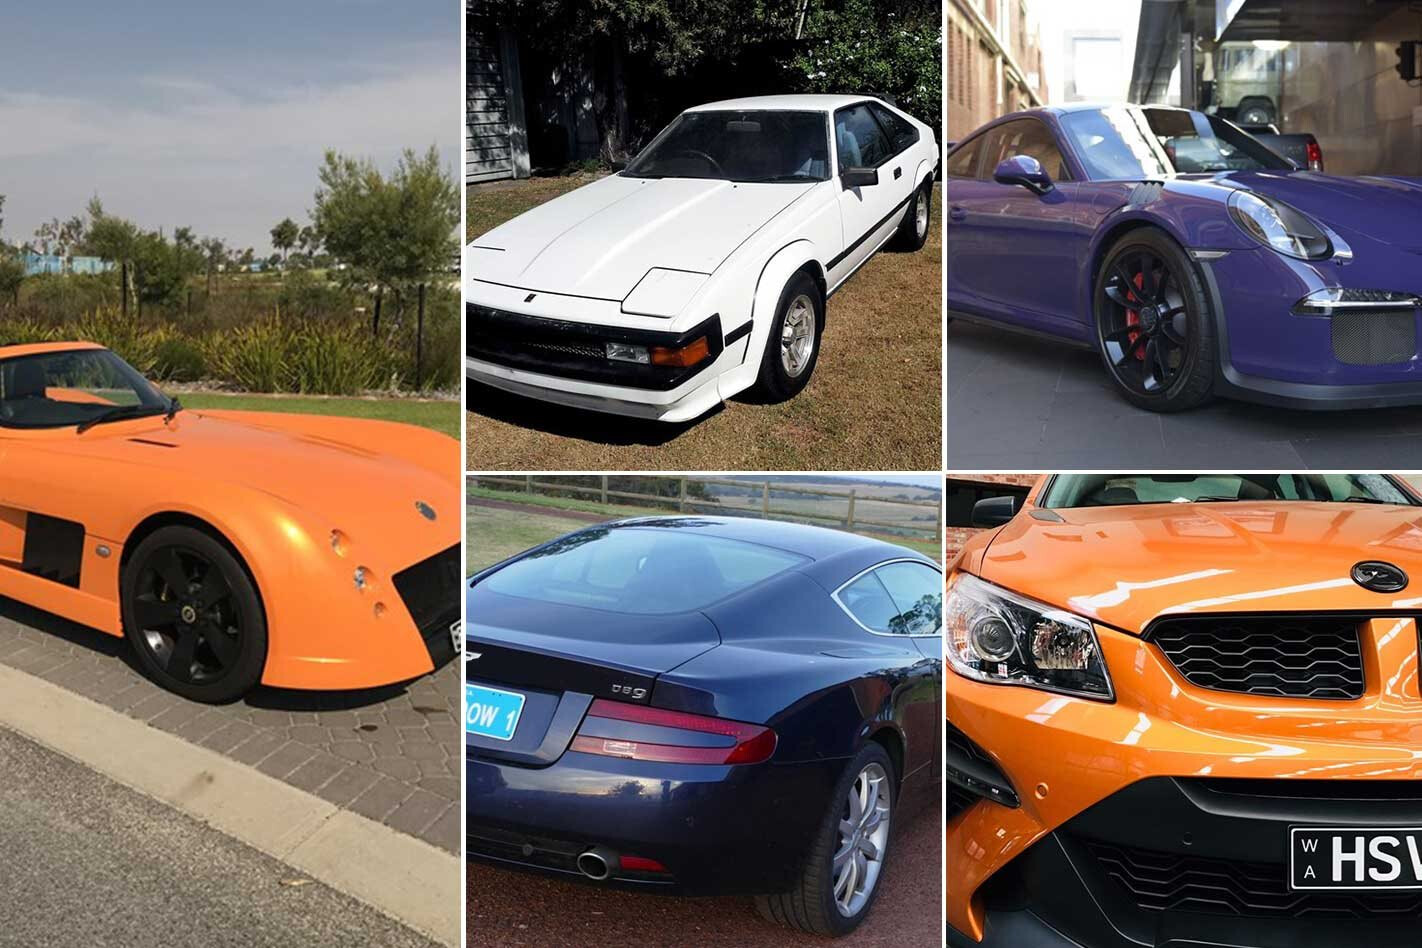 Hsv W1 Gt3 Rs Elfin A61 Supra Db9 Classifieds Of The Week